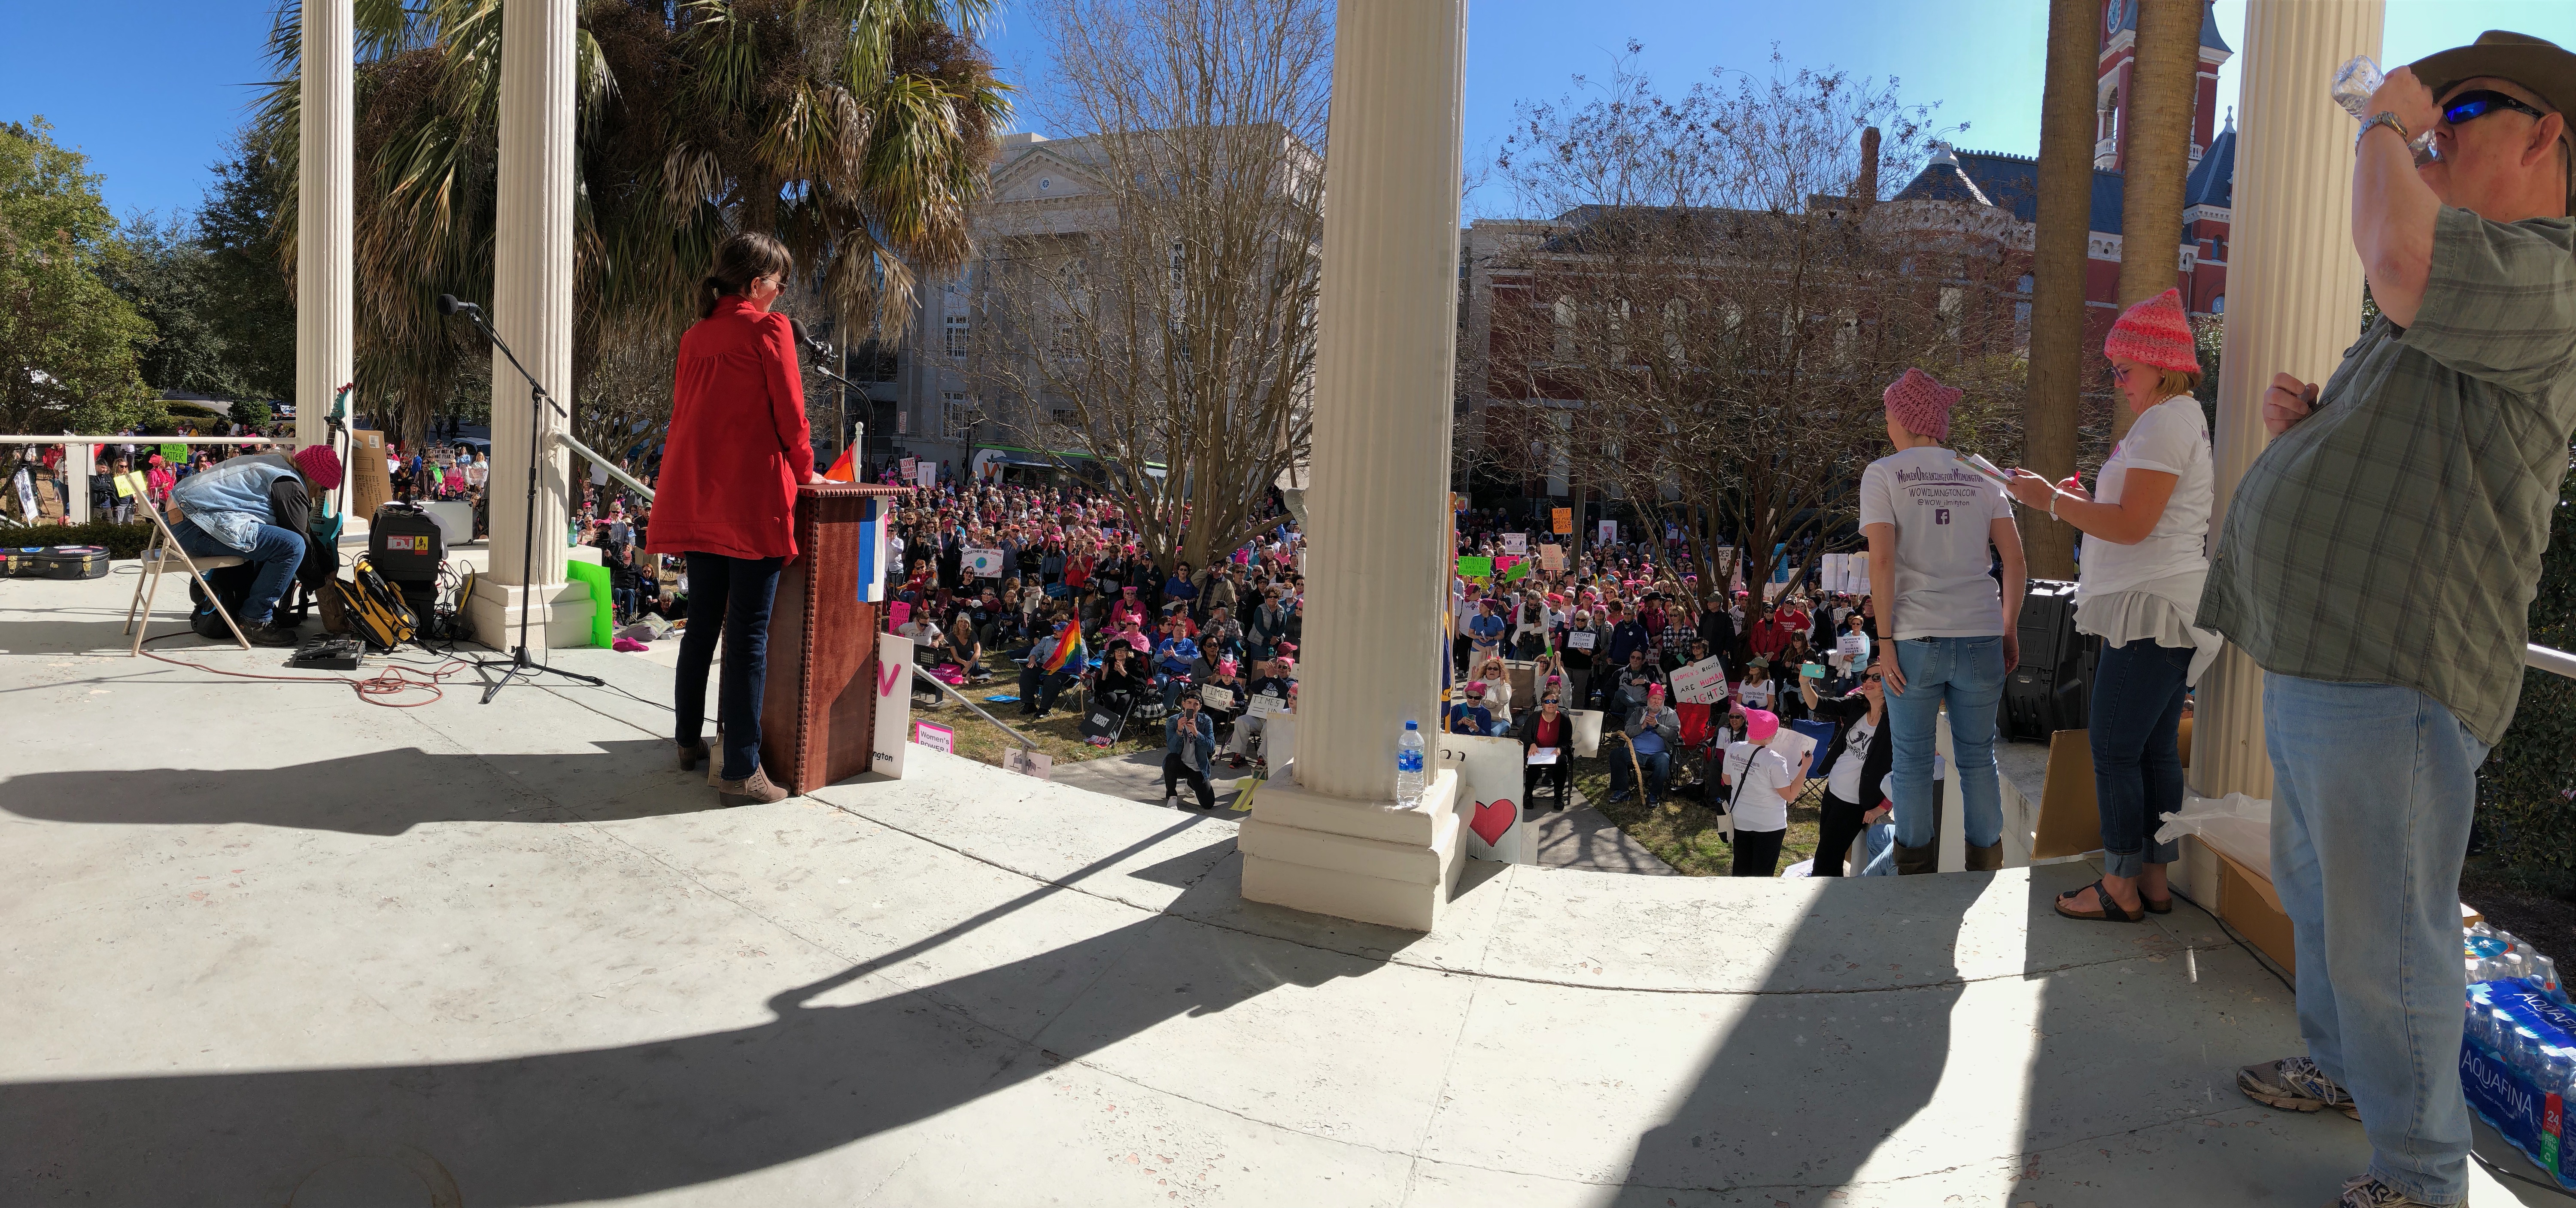 Dana Sargent speaking at the Wilmington Women's March, January 20, 2018